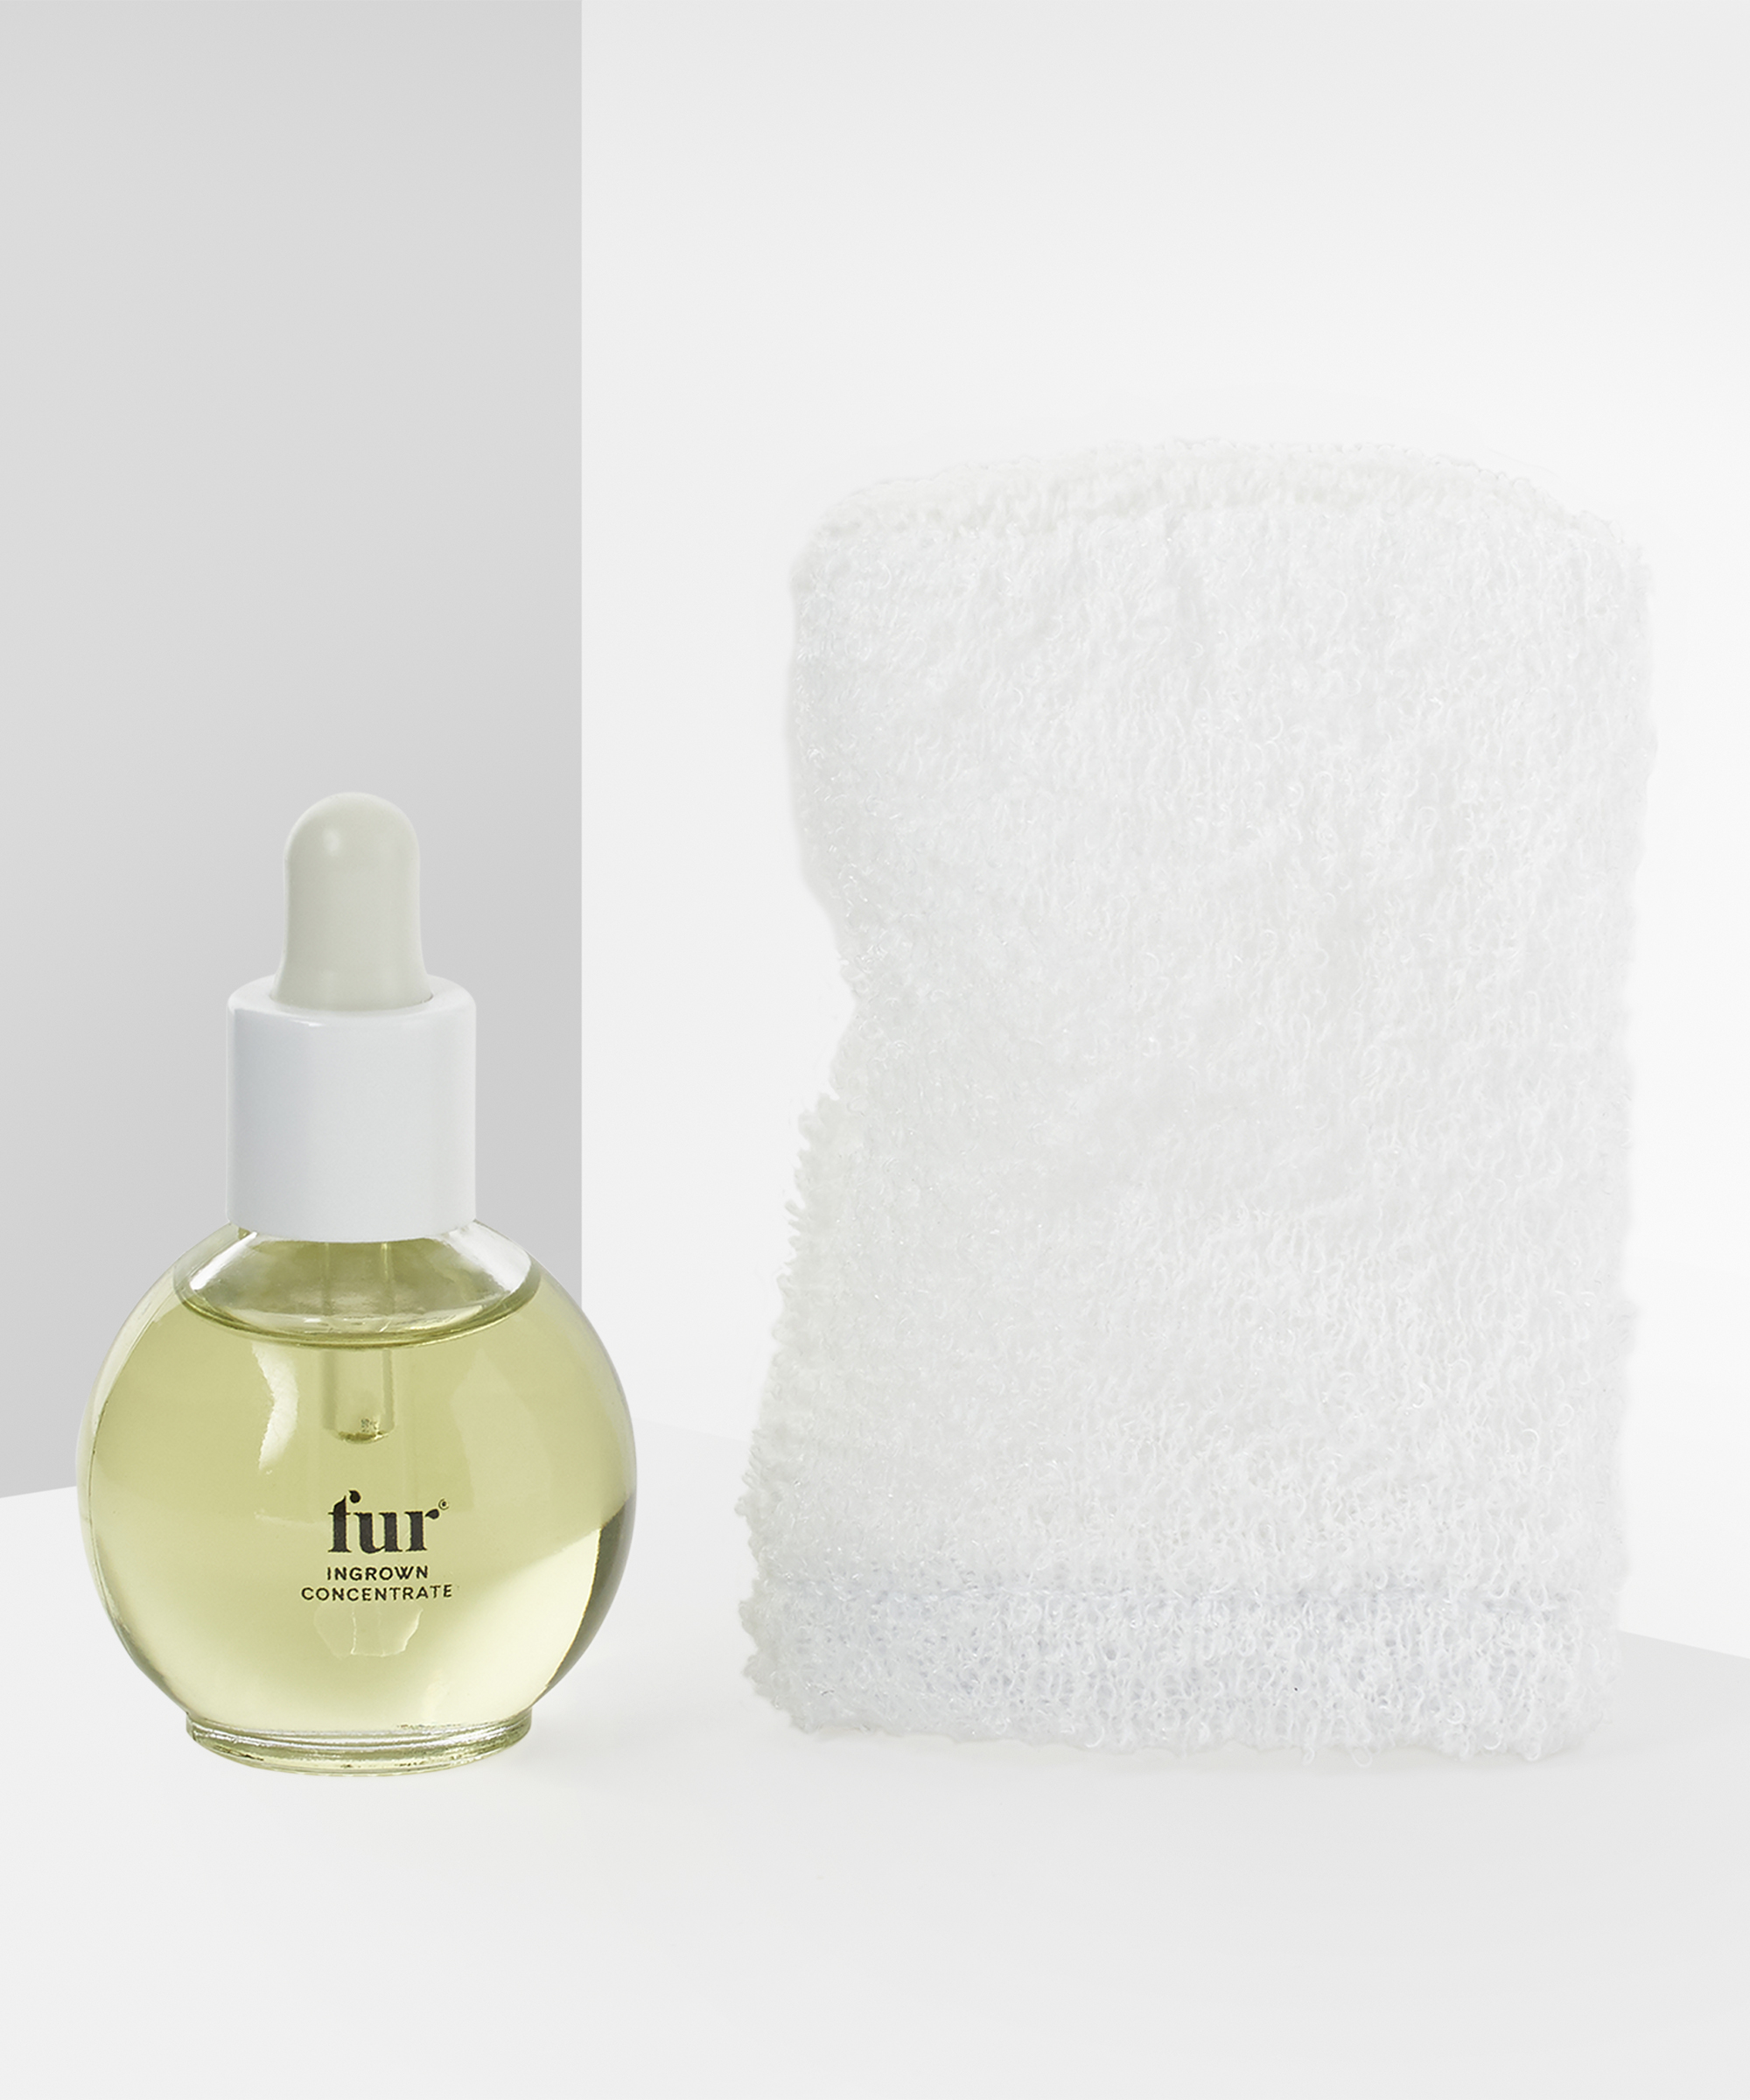 Fur Ingrown Concentrate at BEAUTY BAY